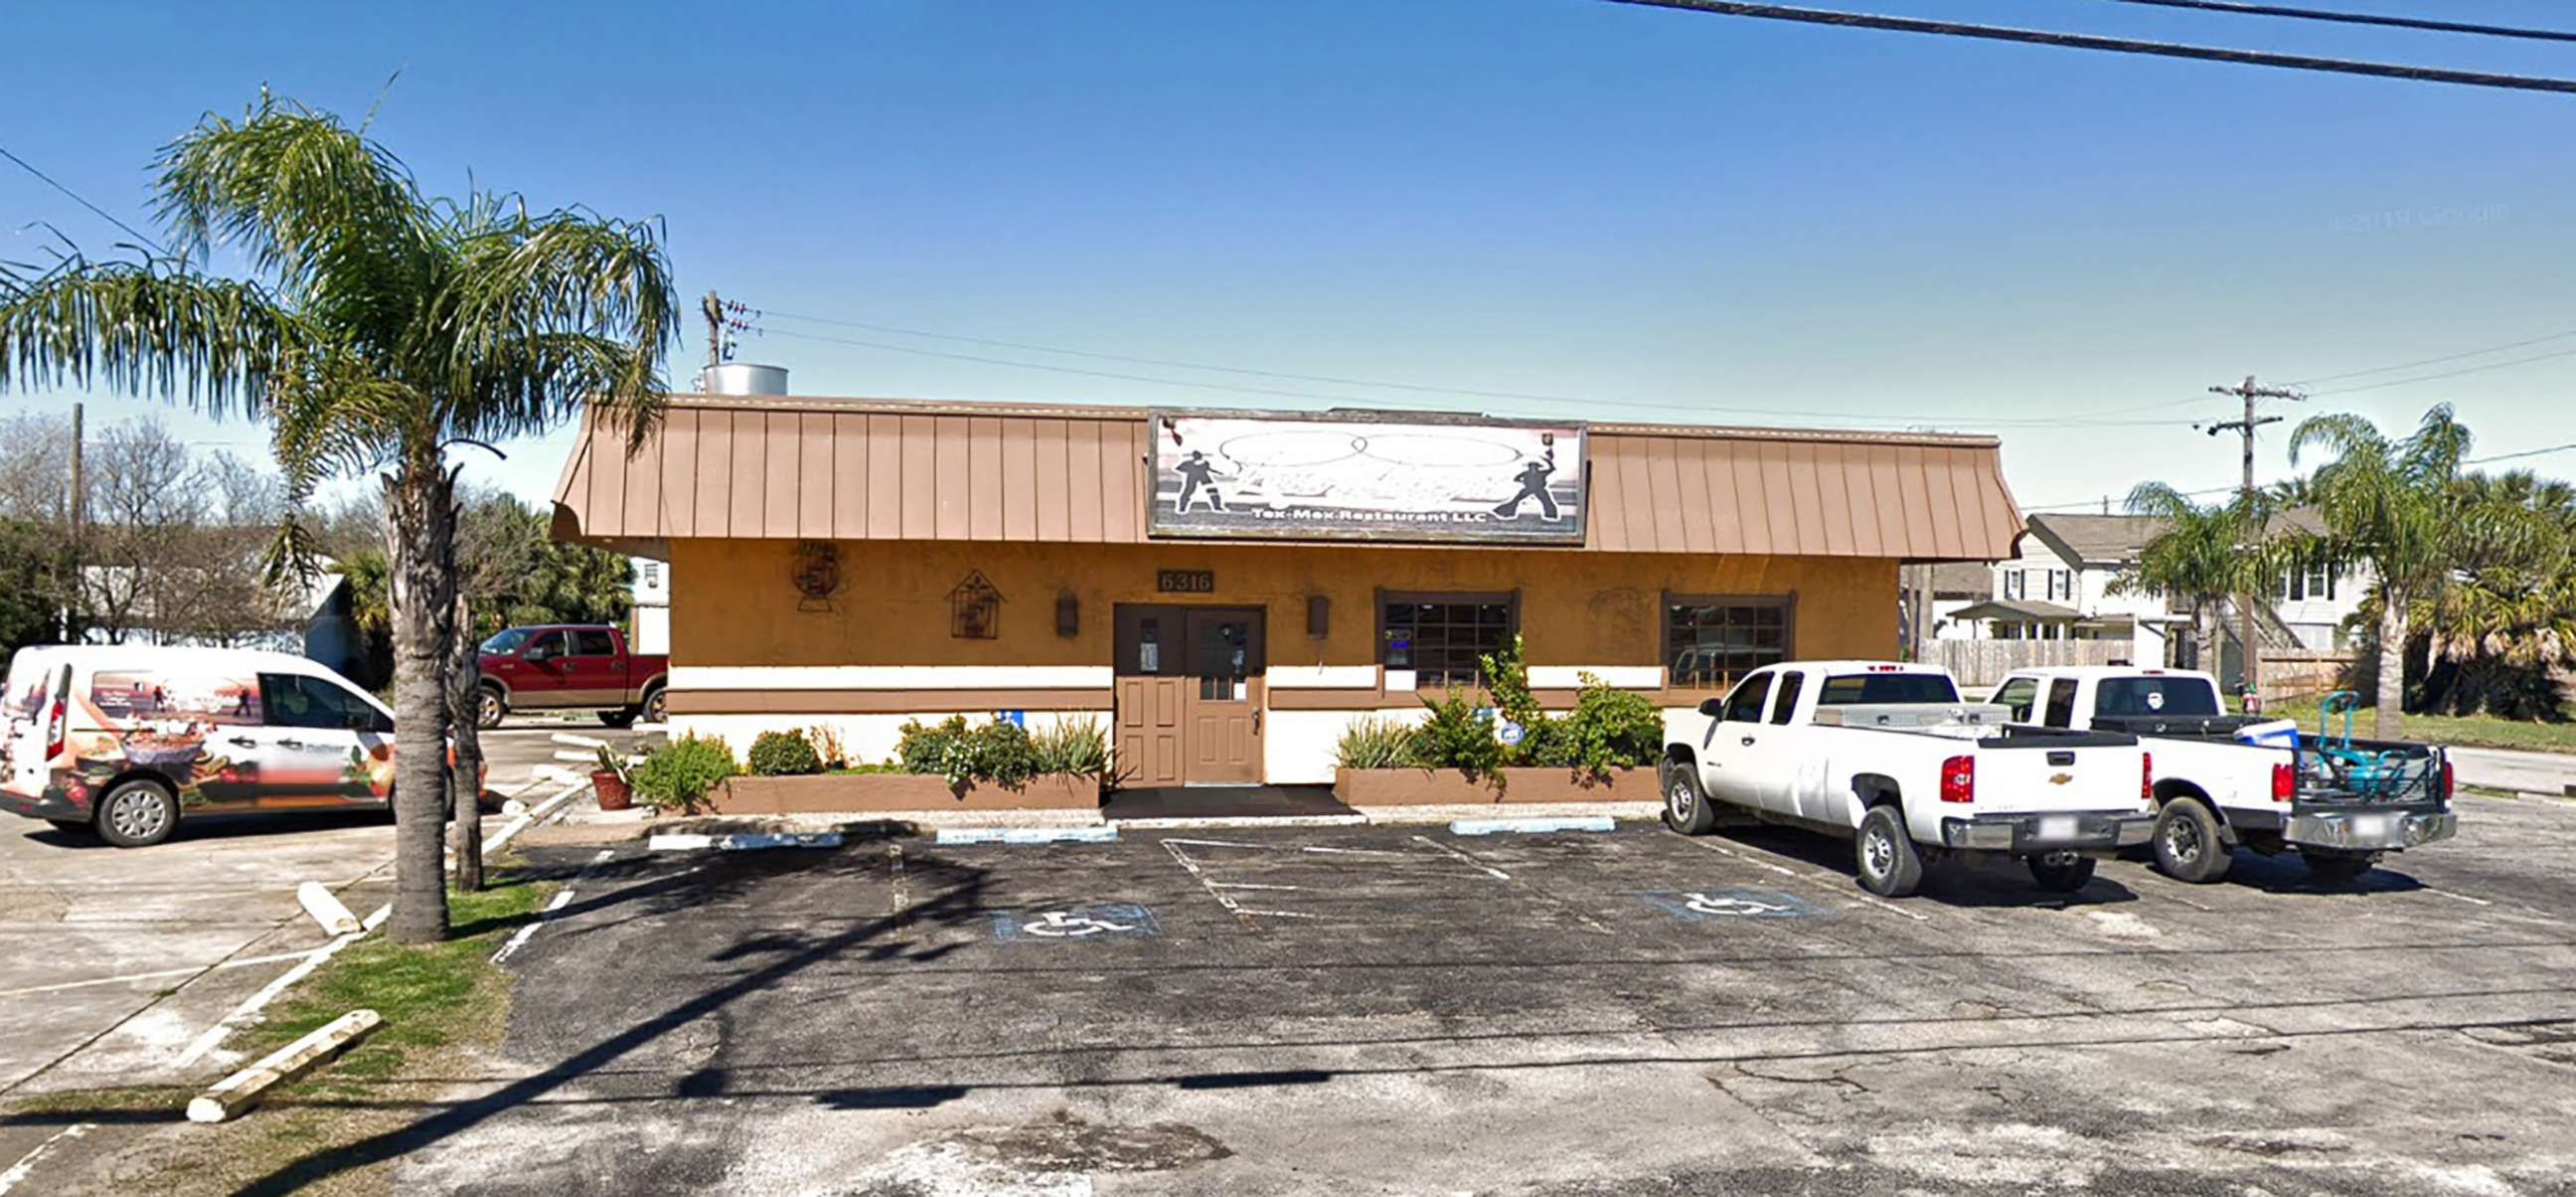 PHOTO: Los Lazos Mexican restaurant is pictured in this undated image from Google.